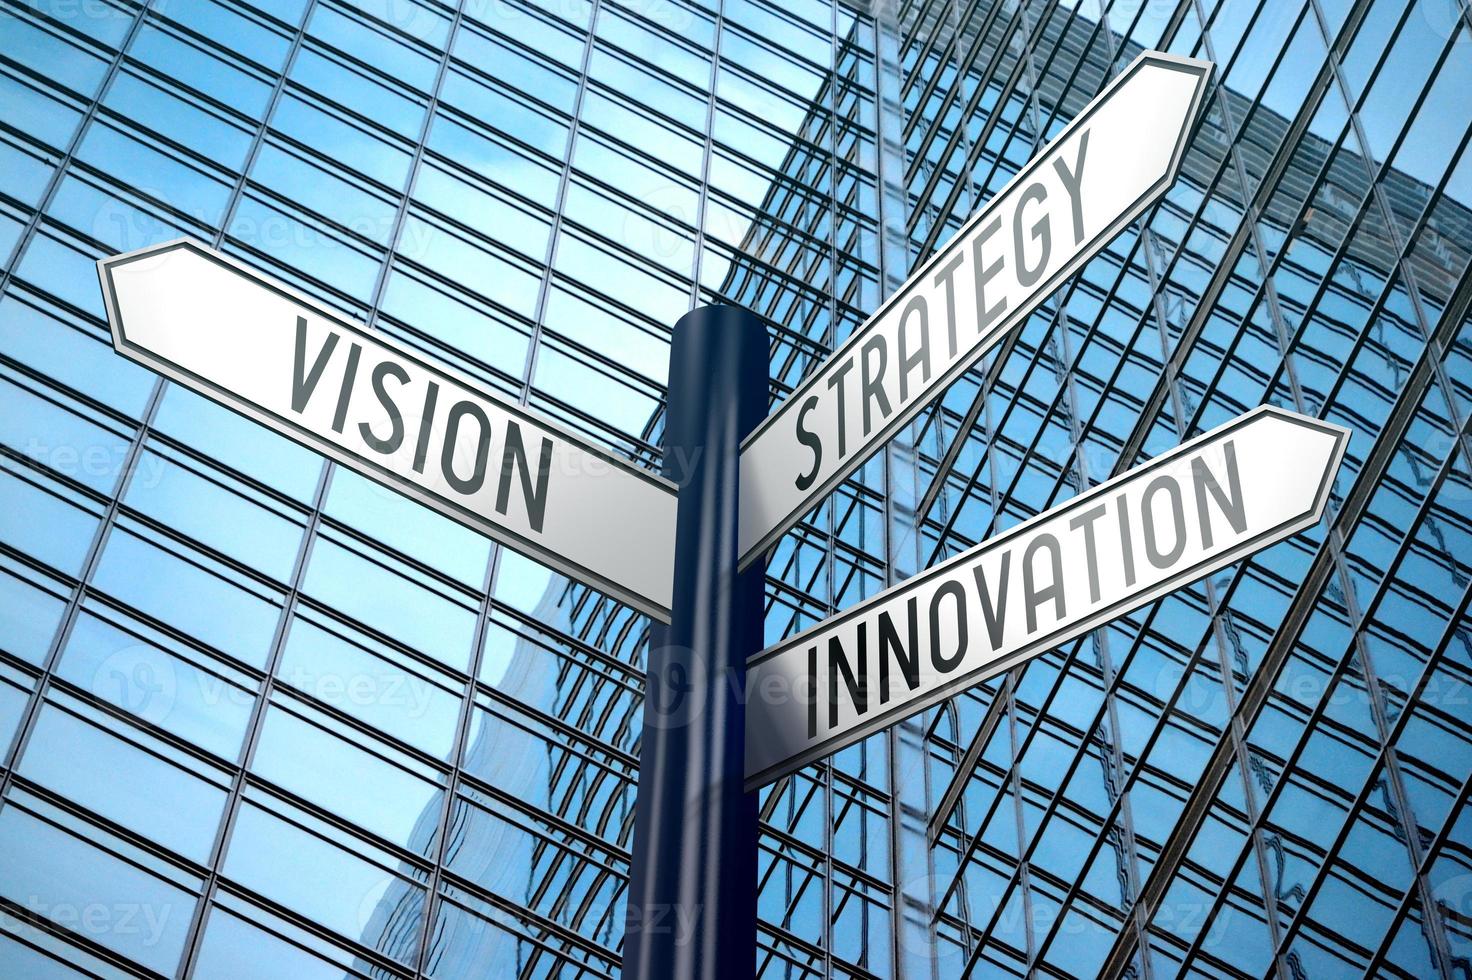 Vision, Strategy, Innovation - Signpost With Three Arrows, Office Building in Background photo